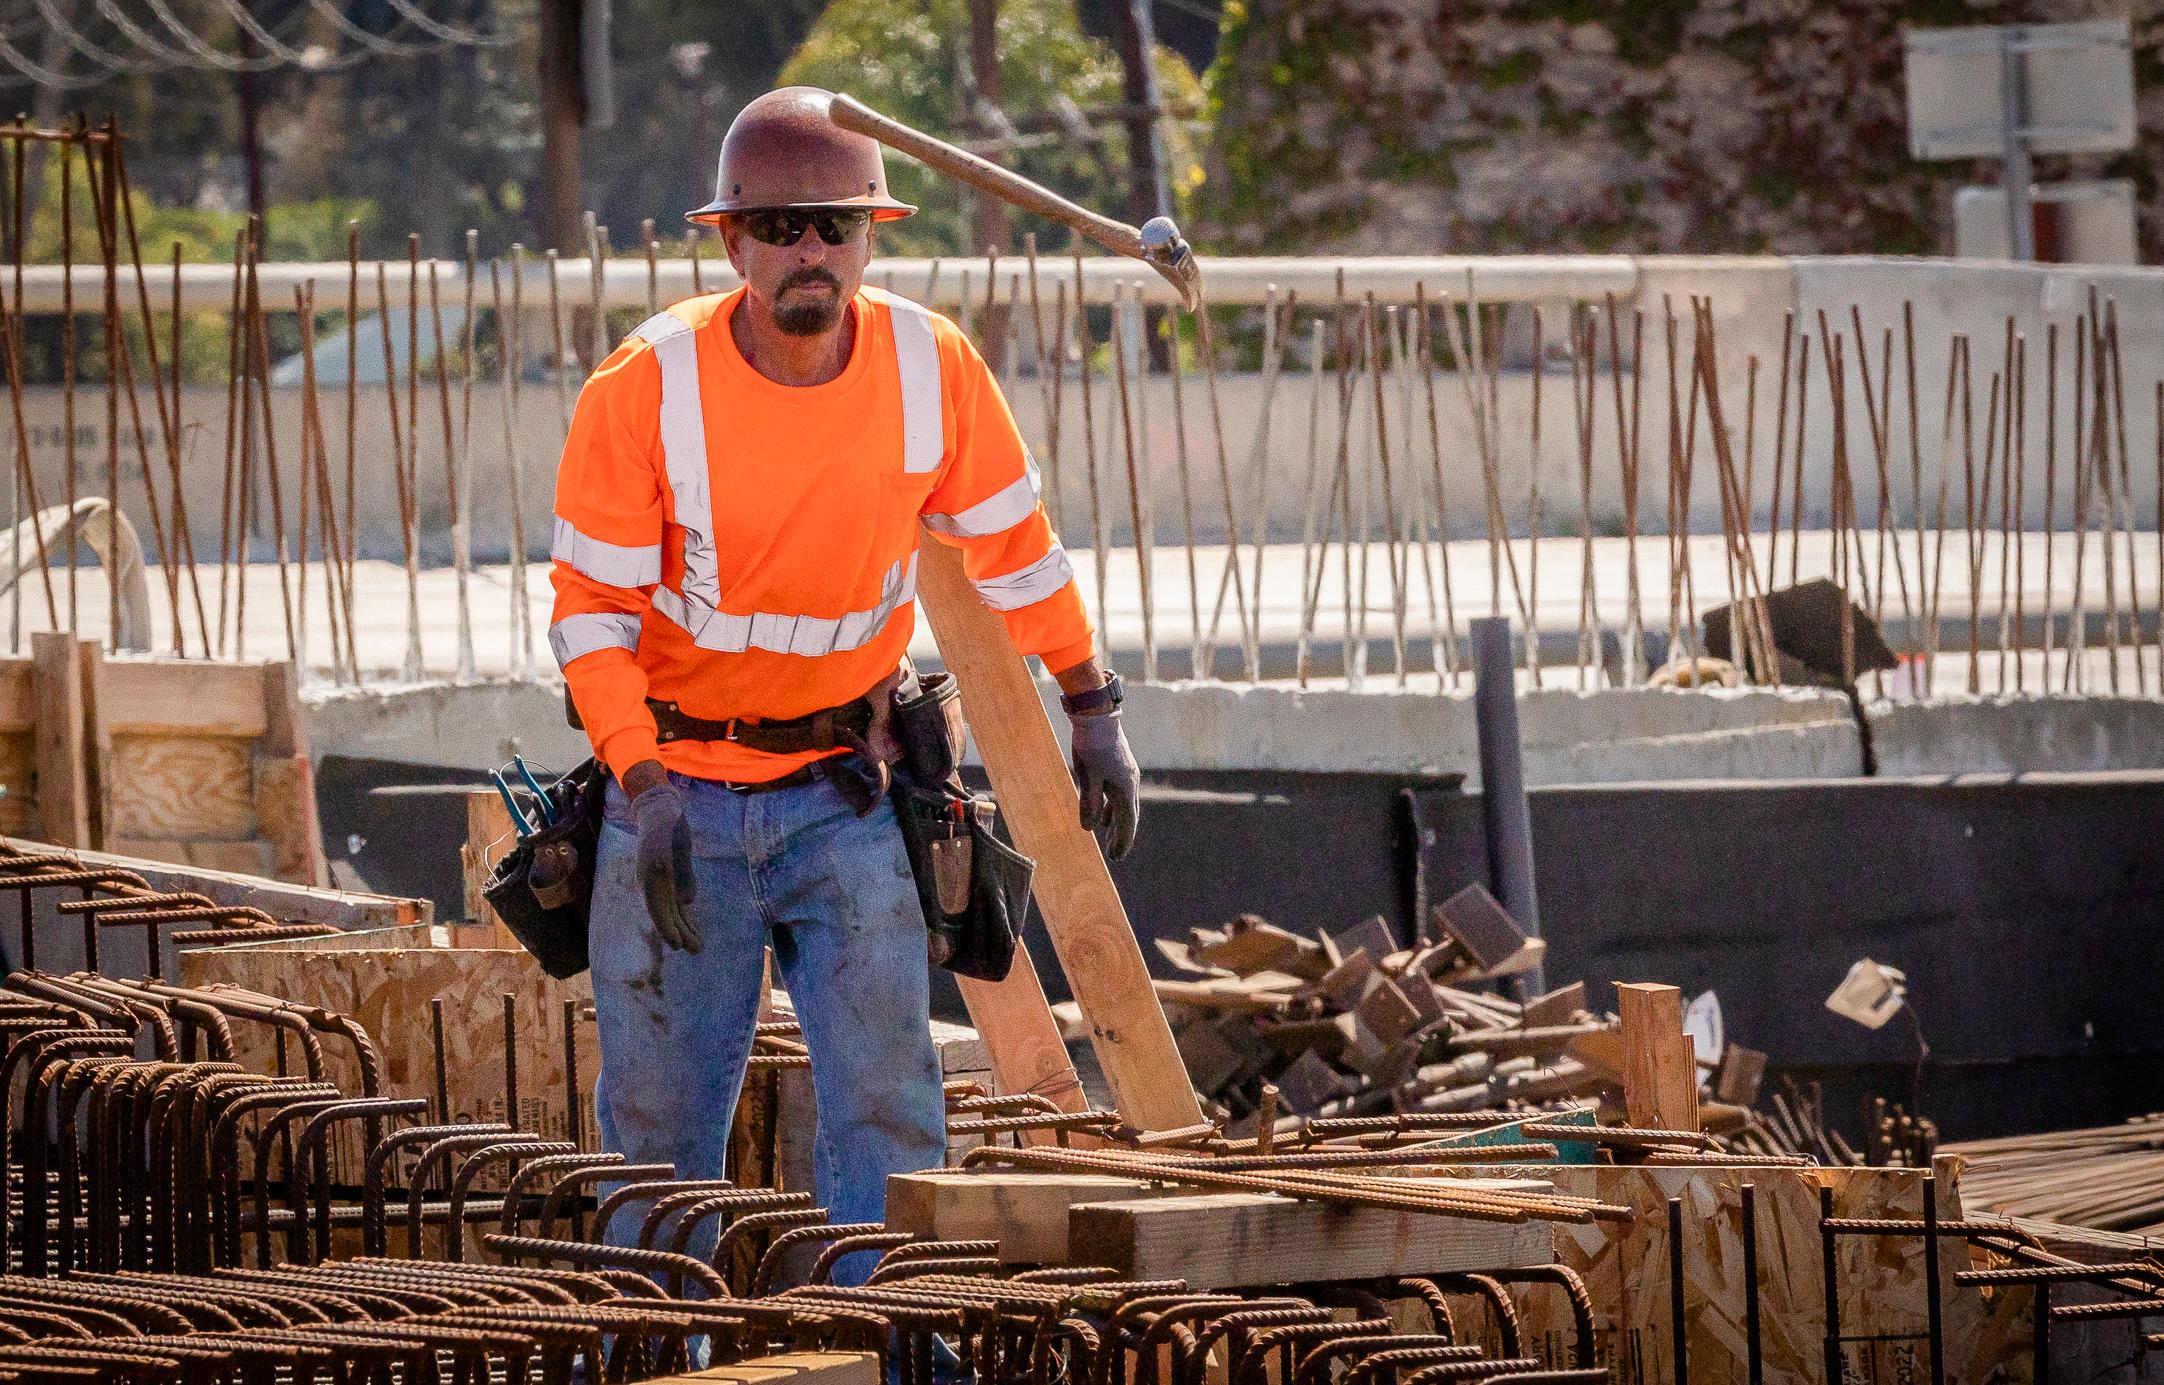 Legislators Seek to Stop California’s Controversial Contractor Law From Spreading Nationwide